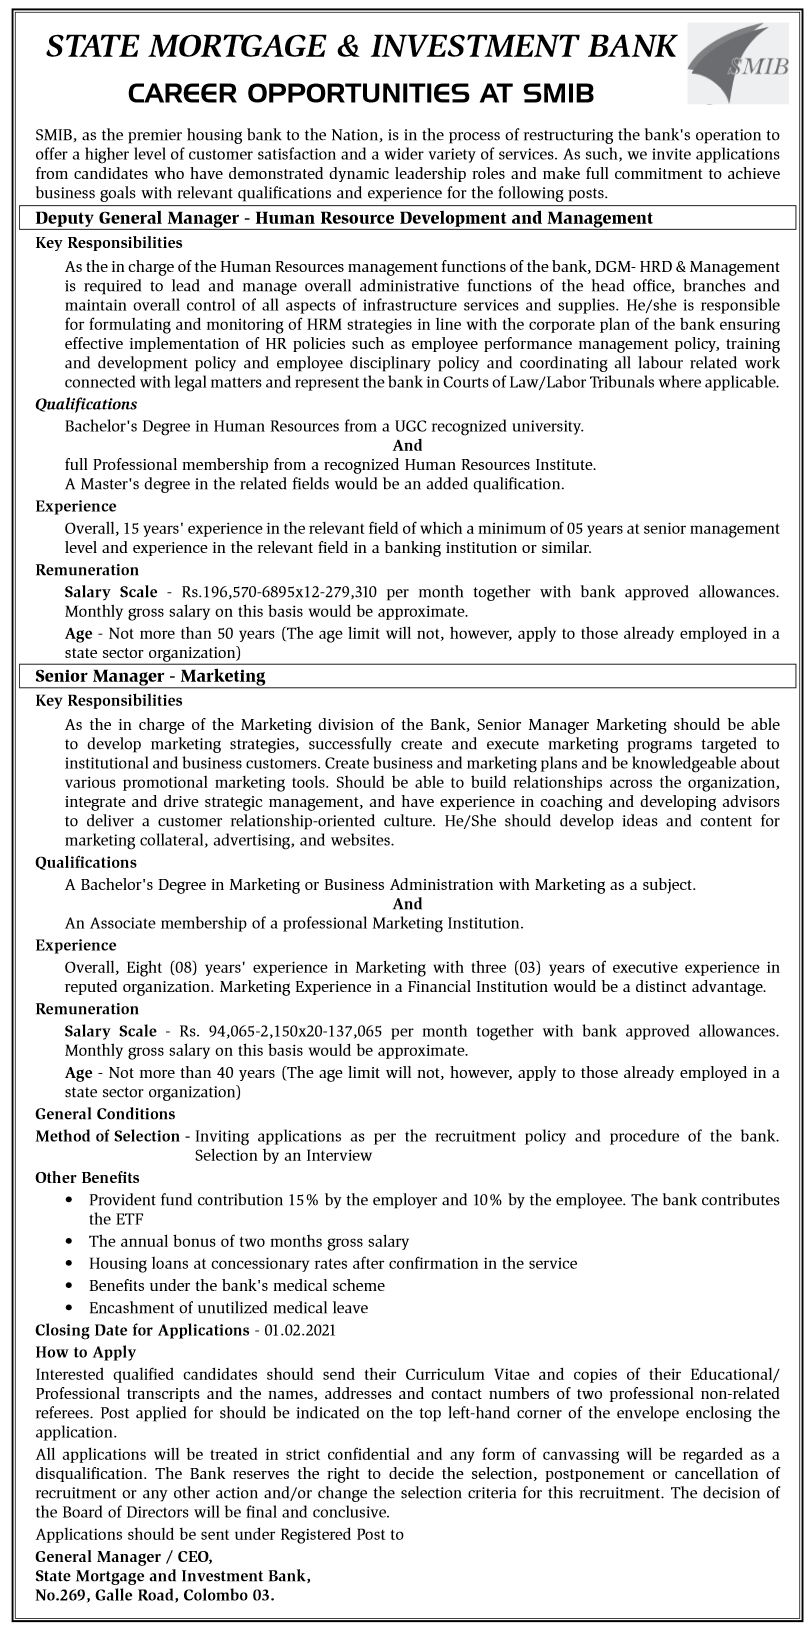 Senior Manager (Marketing), Deputy General Manager (Human Resource Development and Management) – State Mortgage and Investment Bank